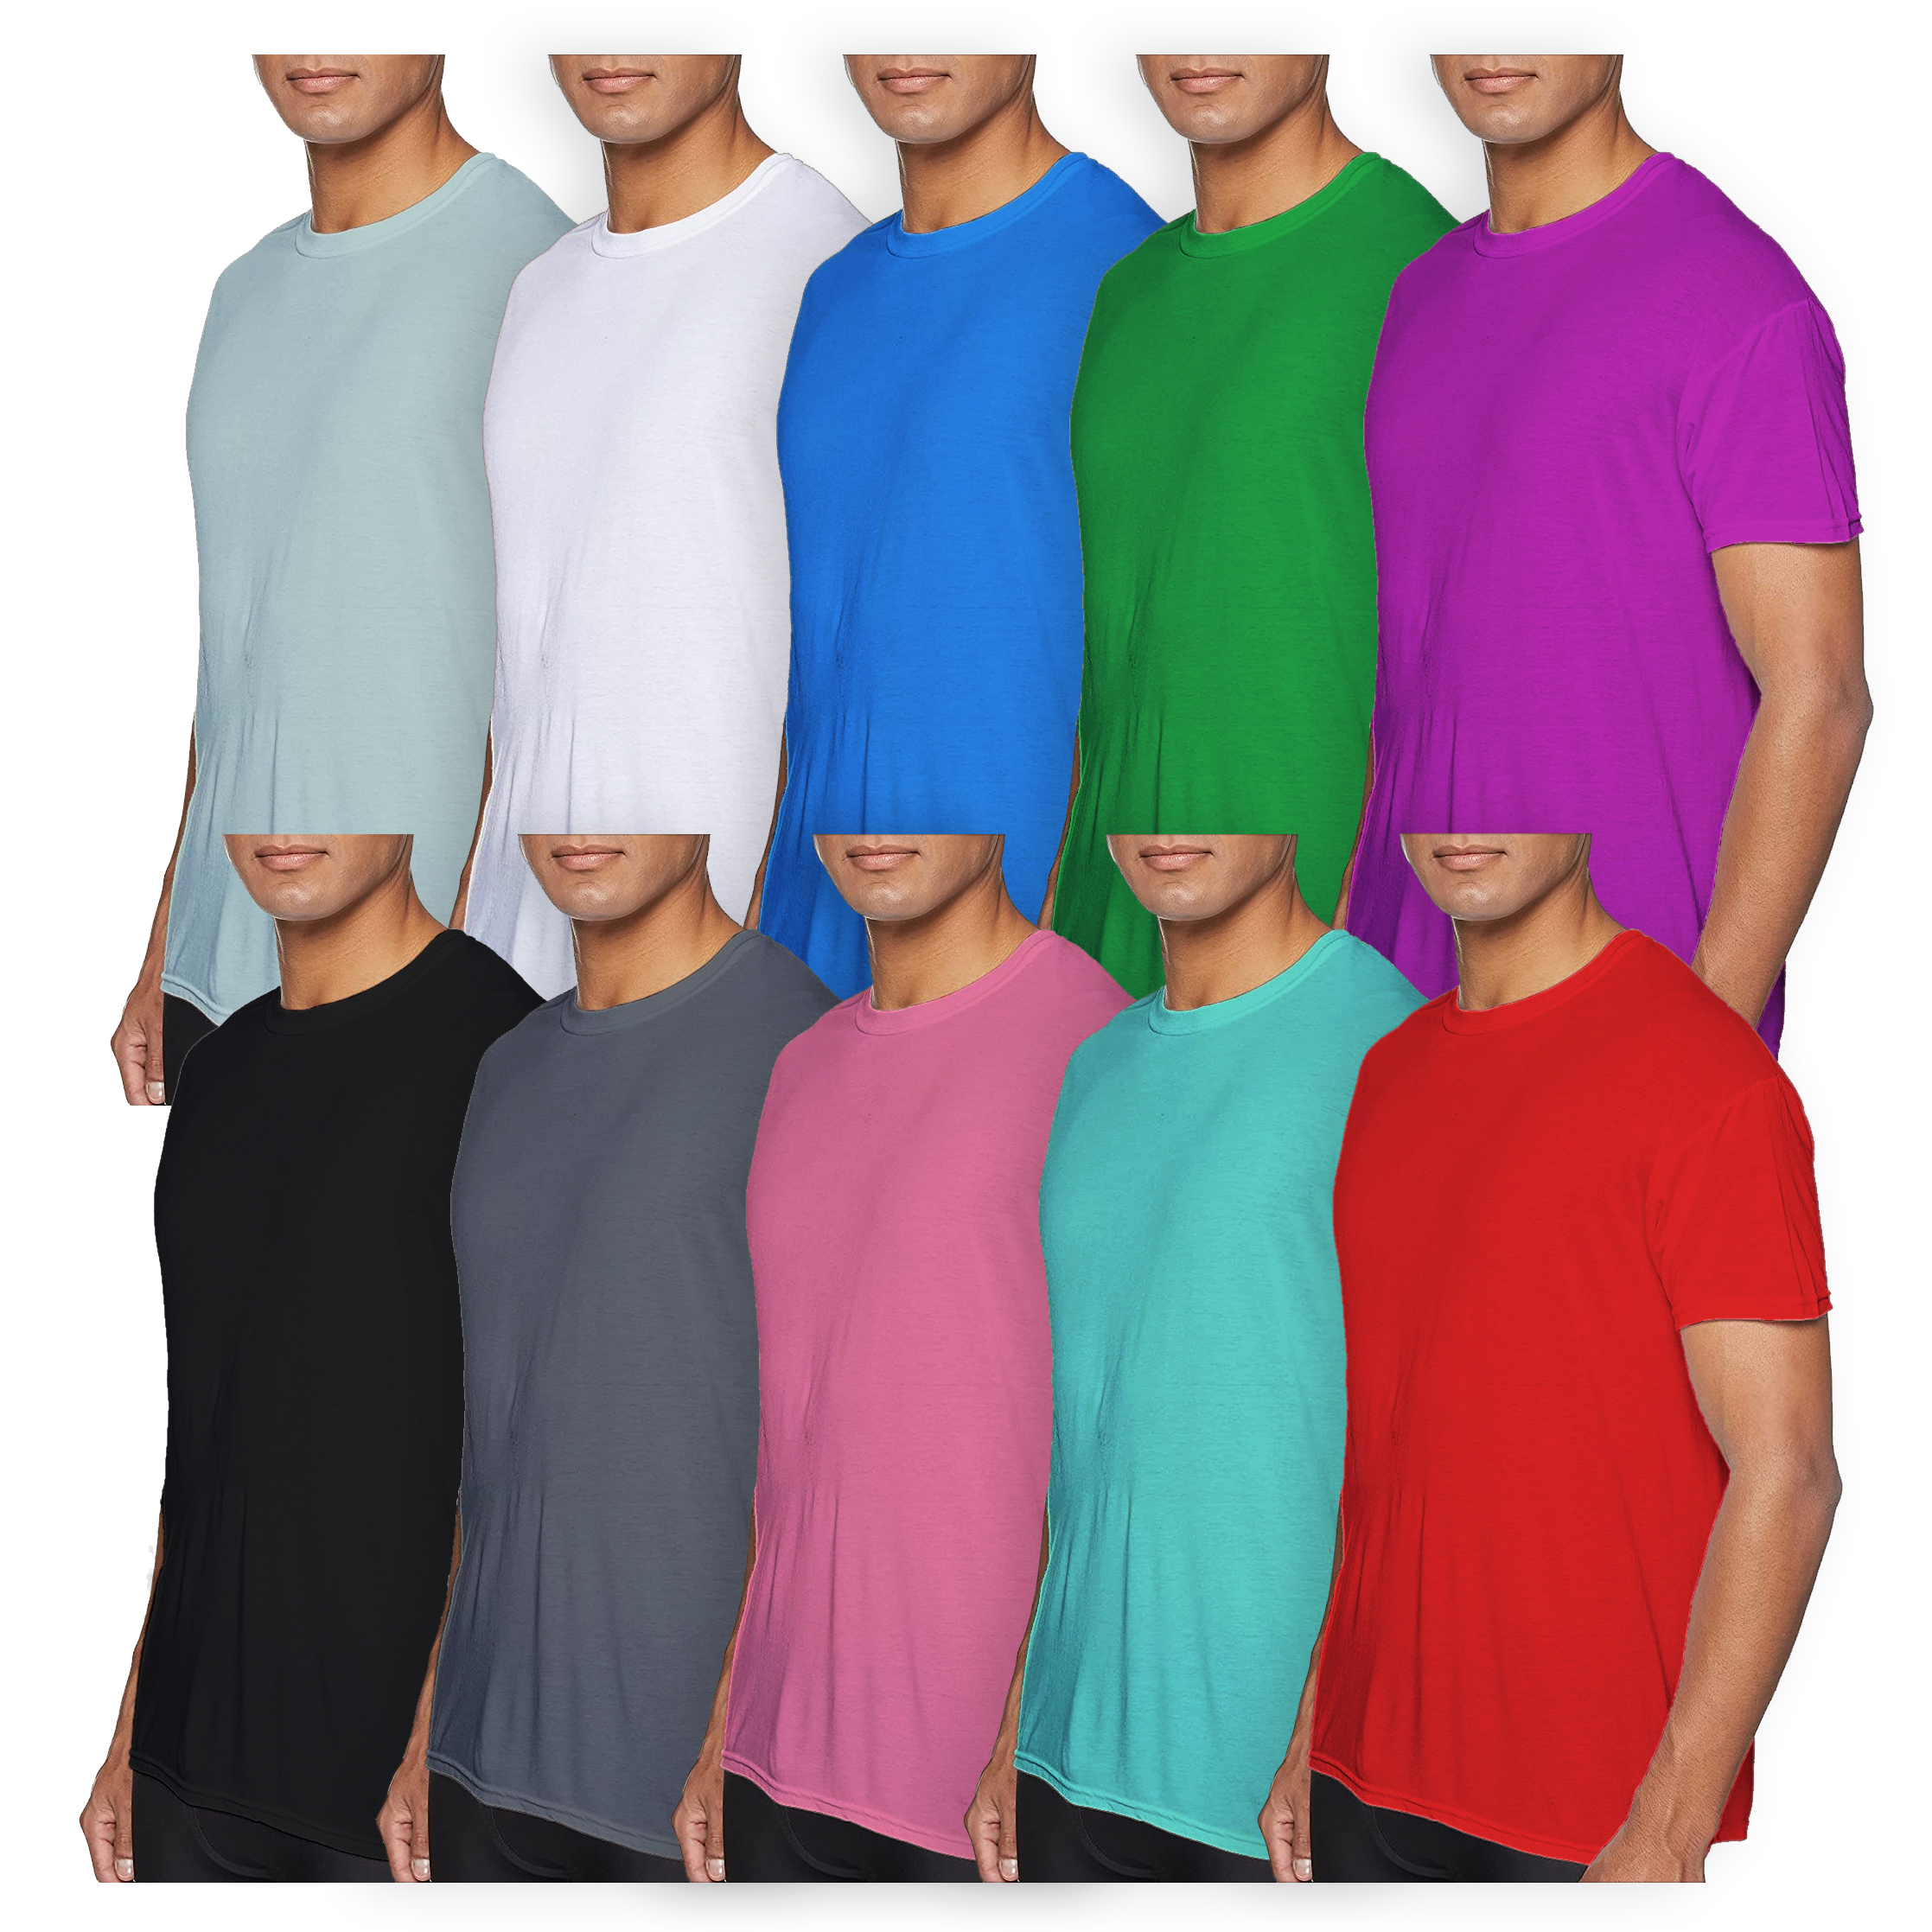 4-Pack: Men's Laviva Active Moisture Wicking Dry Fit Crew Neck Shirts - S